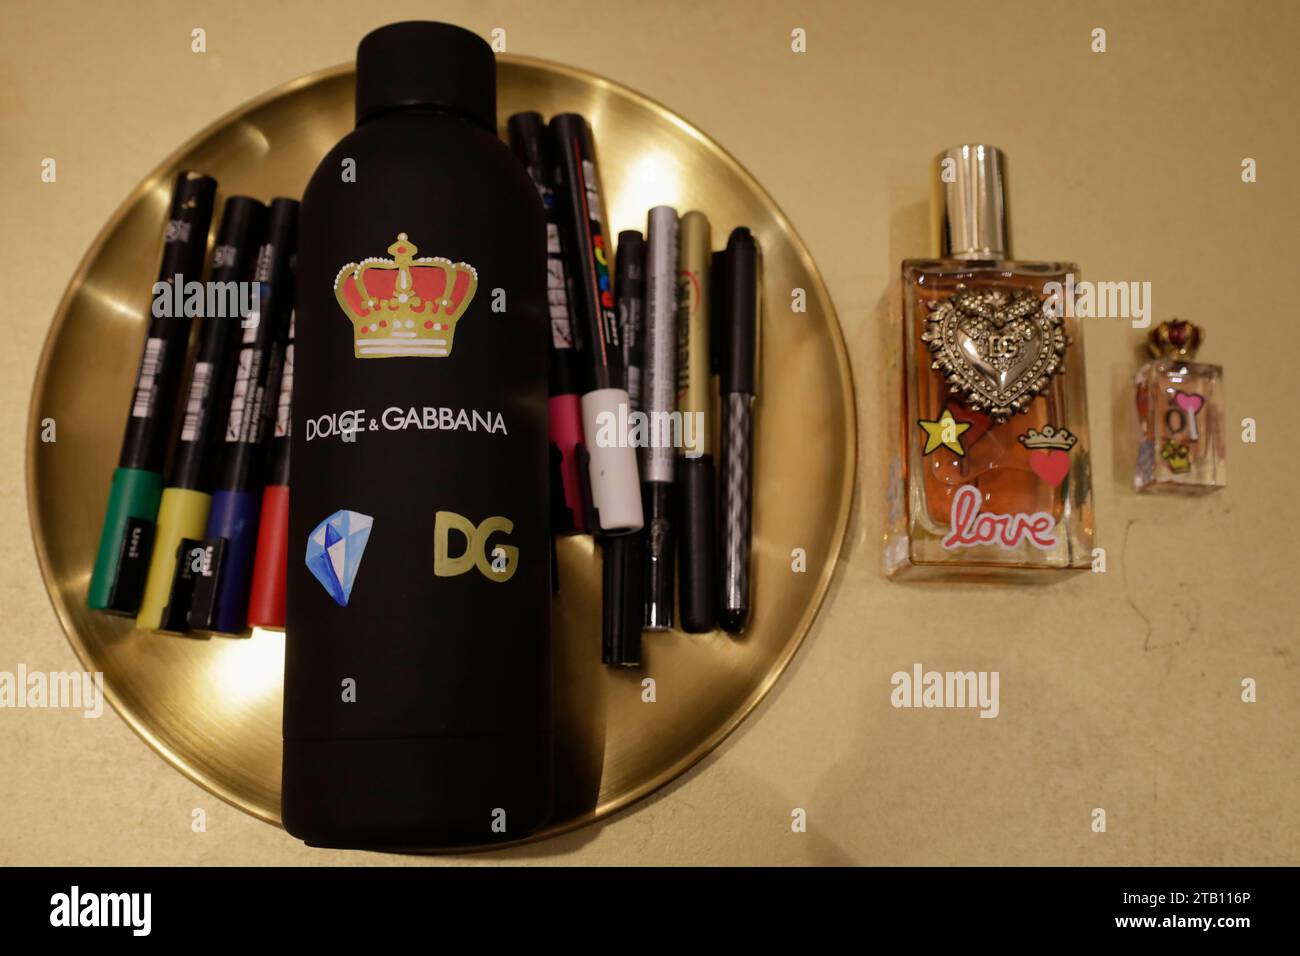 A thermos and two perfume containers from the Italian brand Dolce & Gabbana are being personalized with acrylic paint markers by Guadalupe Navarro Mabarak, a young Mexican-Lebanese illustration specialist who graduated from the Design and Visual Communication degree at the Faculty of Arts and Design of the National Autonomous University of Mexico. She is working in the facilities of the El Palacio de Hierro department store in Mexico City, on Christmas Eve, through the Design Emergency Studio agency. (Photo by Gerardo Vieyra/NurPhoto)0 Stock Photo